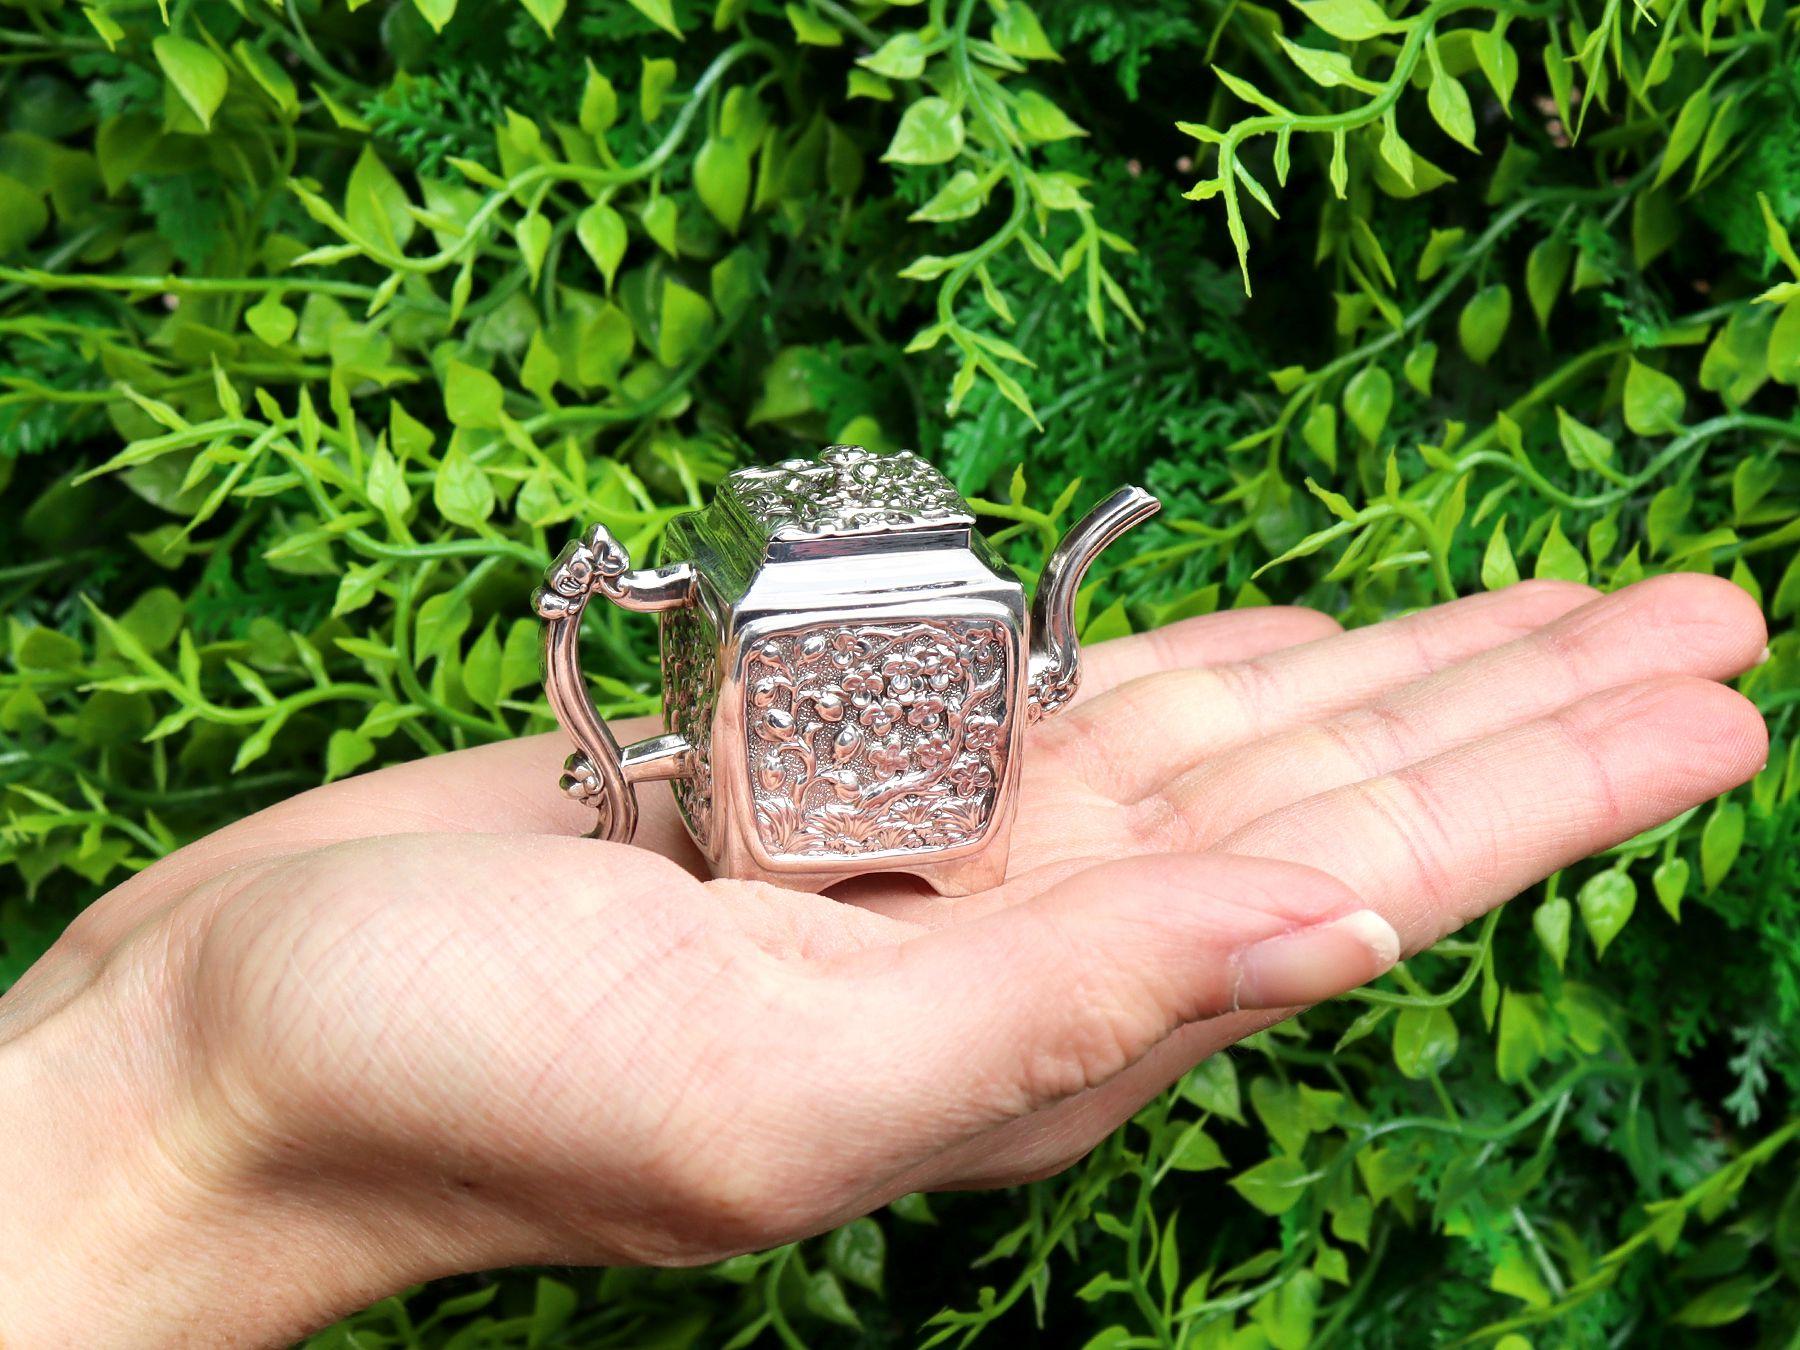 An exceptional, fine and impressive, miniature antique Victorian English sterling silver teapot in the Chinoiserie style; an addition to our silver teaware collection

This exceptional and rare antique Victorian sterling silver miniature teapot has